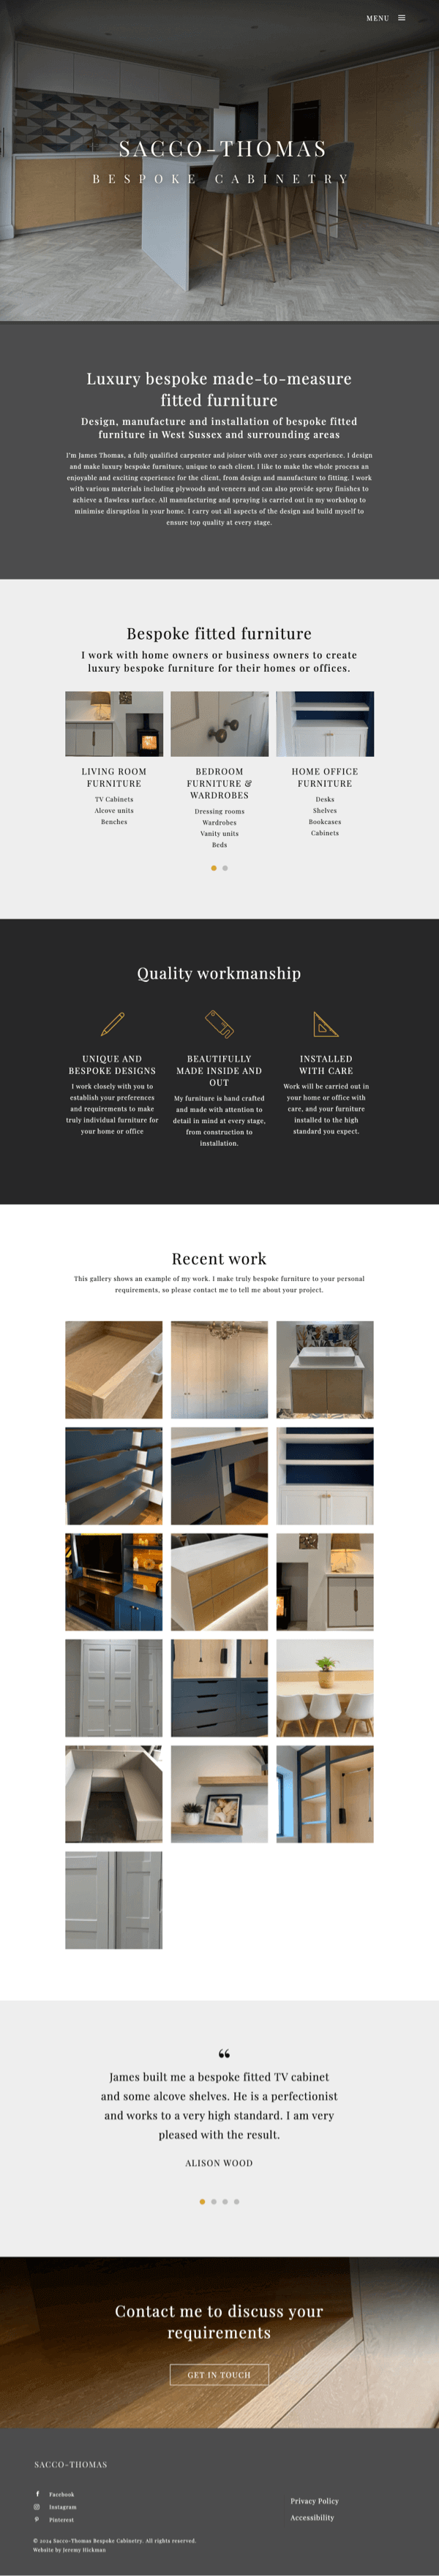 Sacco-Thomas Bespoke Cabinetry (Website simulation on a tablet)